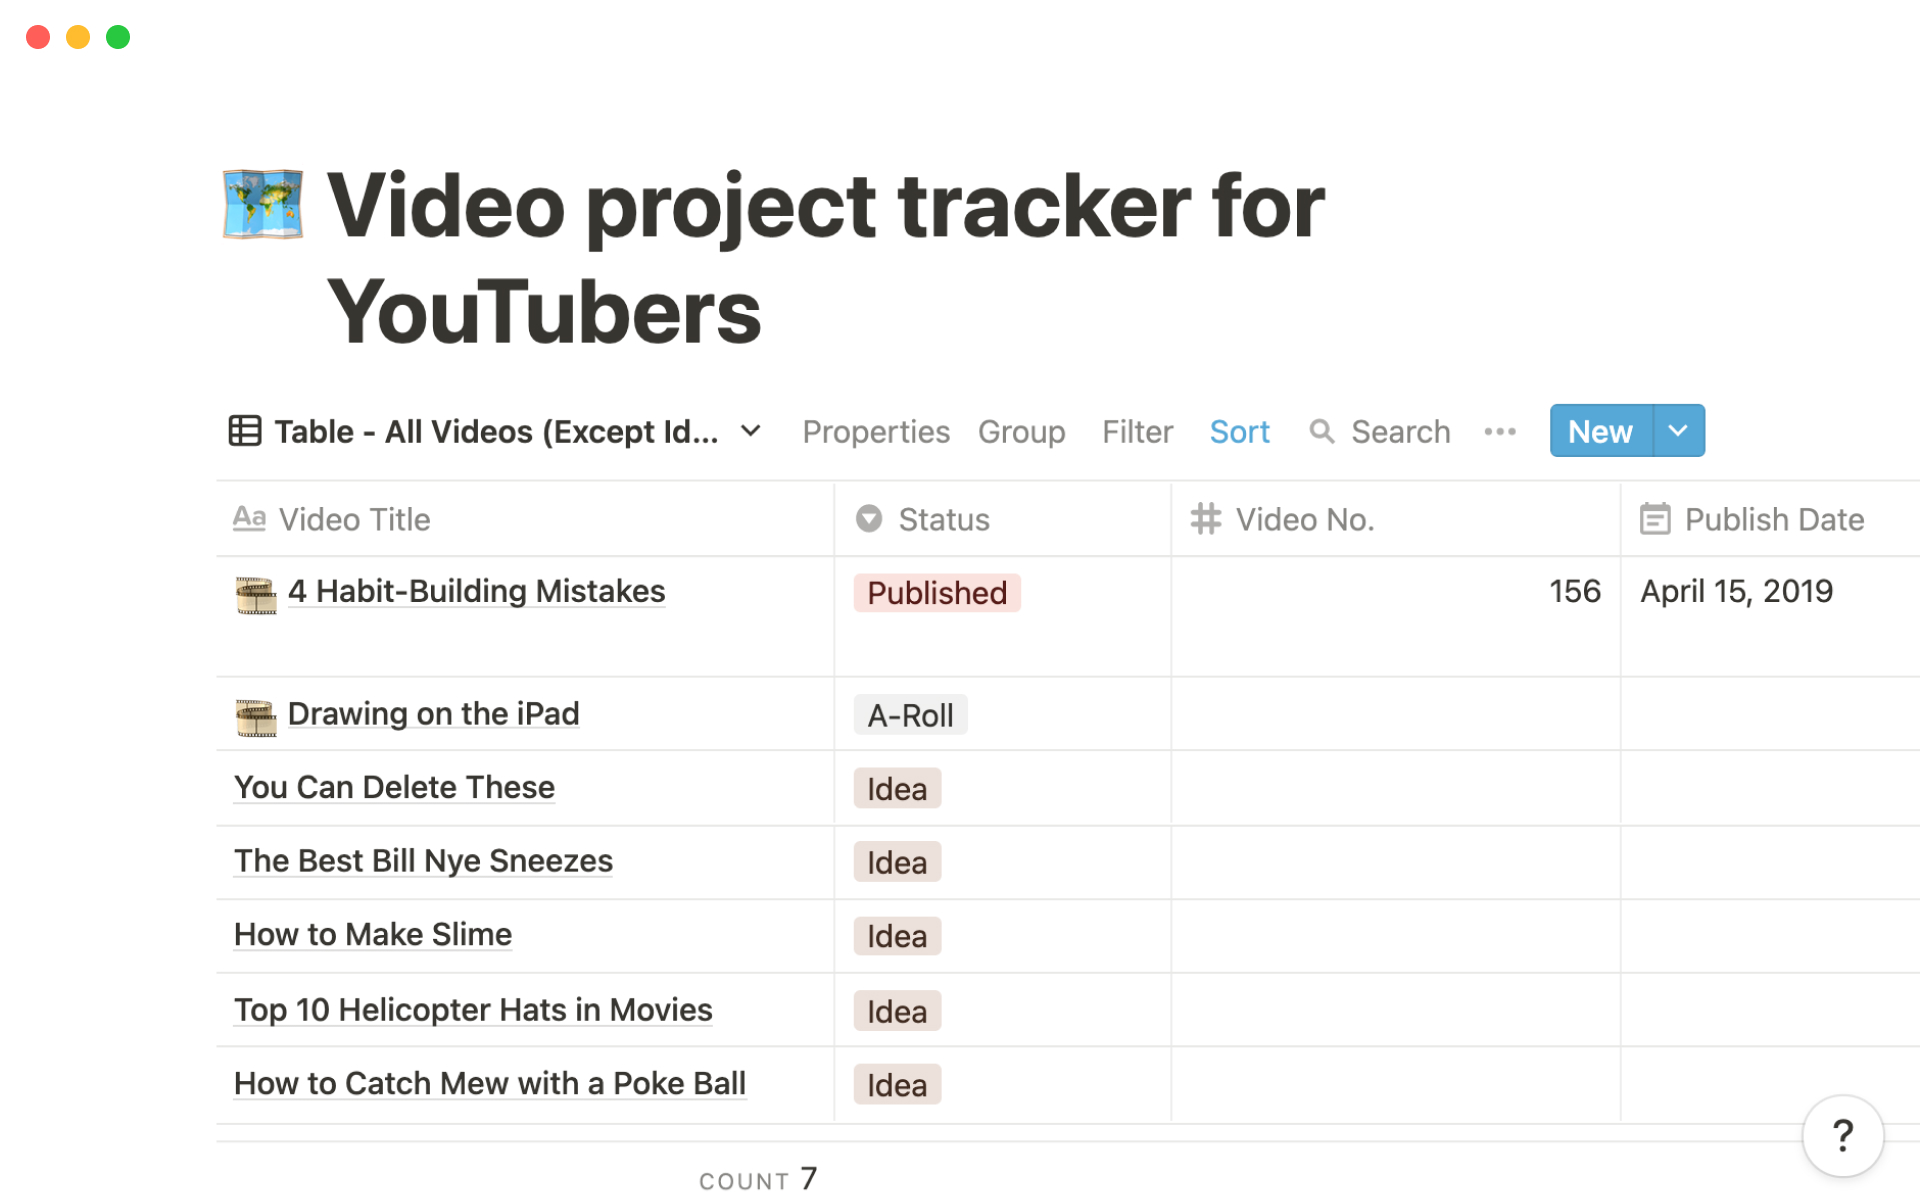 This template simplifies and speeds up the process of creating and publishing a YouTube video.